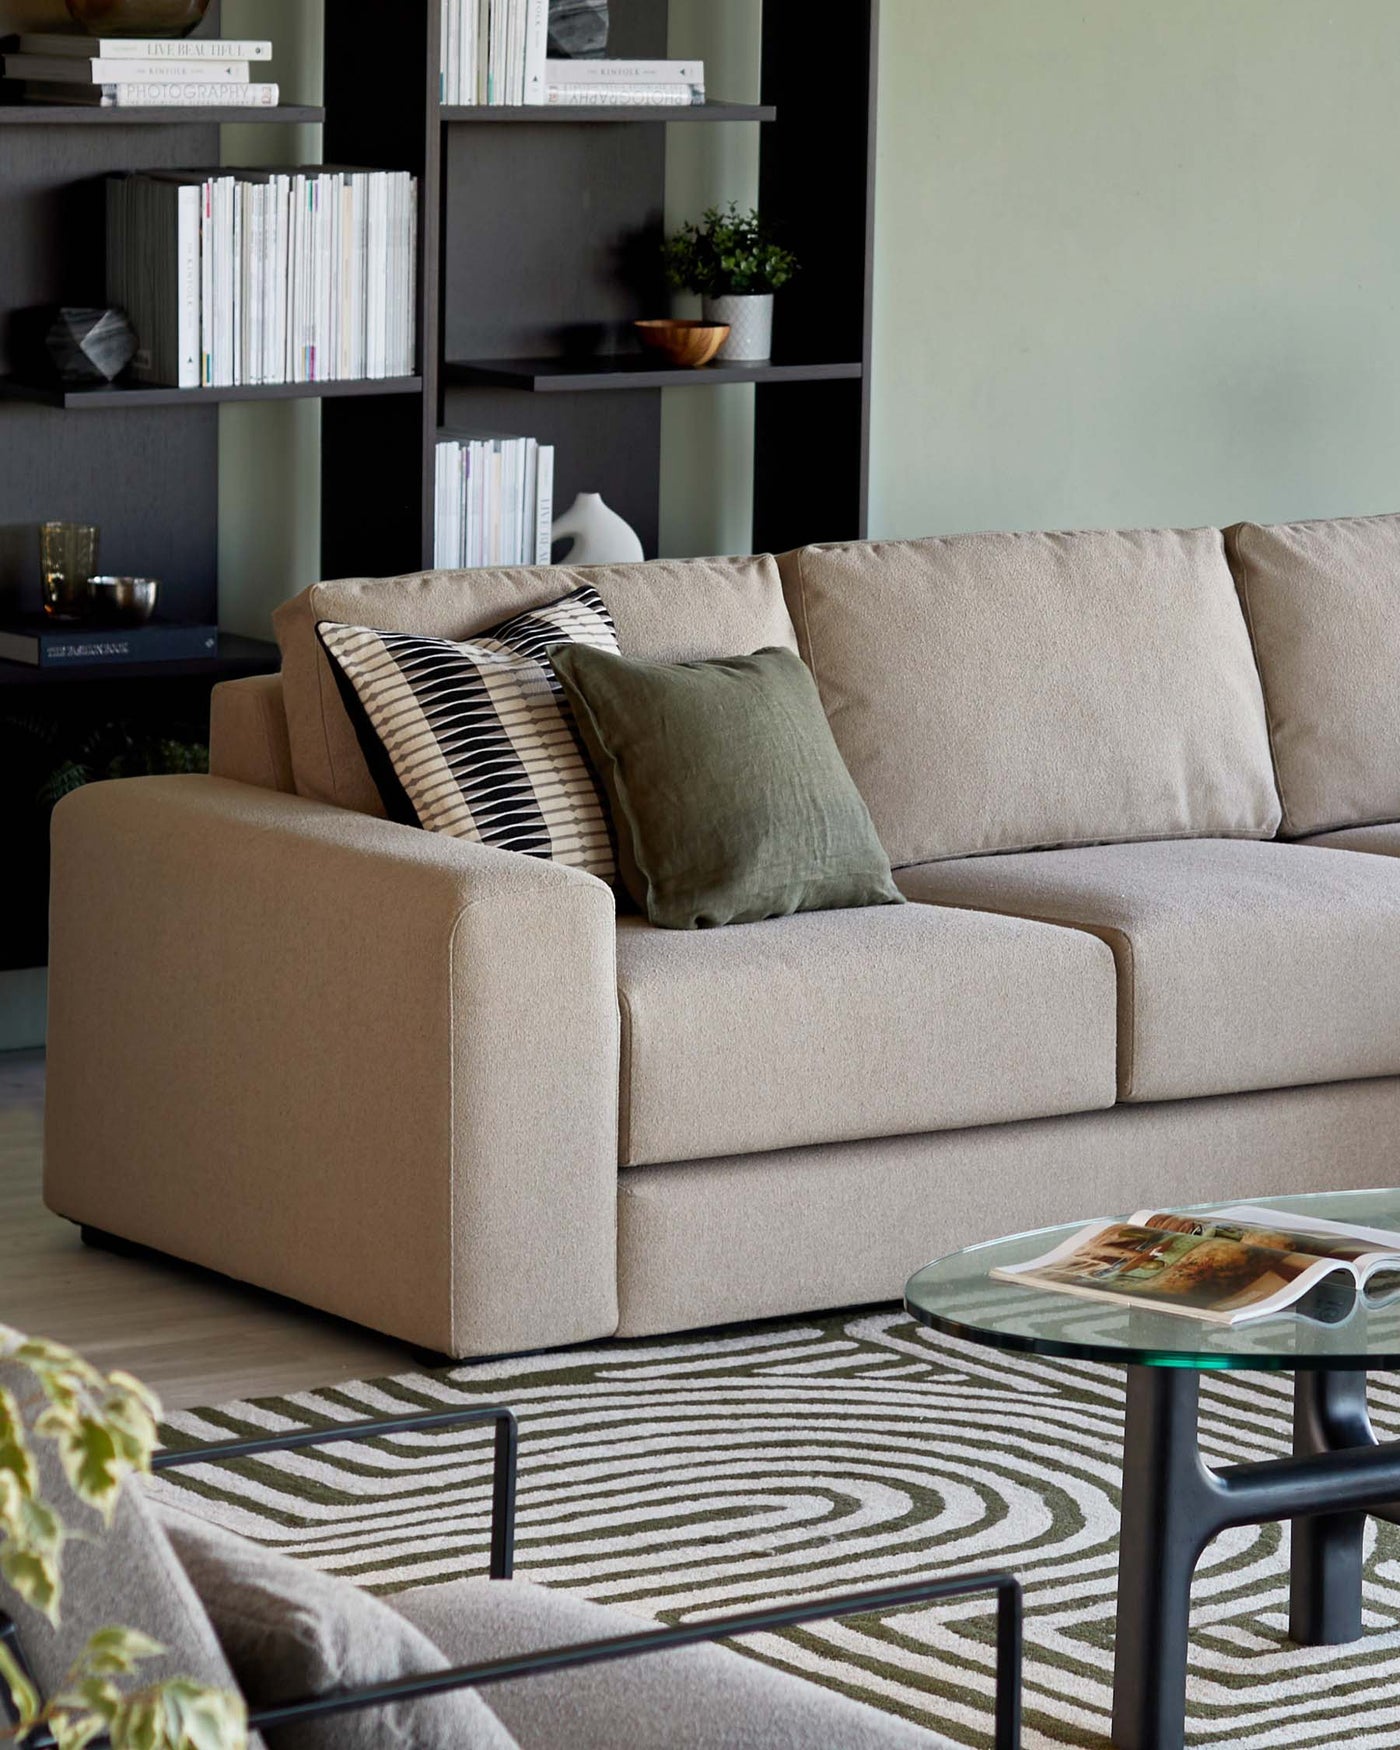 Beige upholstered three-seater sofa with a selection of decorative pillows, complemented by a glass-top coffee table with a black metal frame placed on a patterned area rug. In the background, a dark-toned bookshelf housing various books and decorative items enhances the modern living room ambiance.